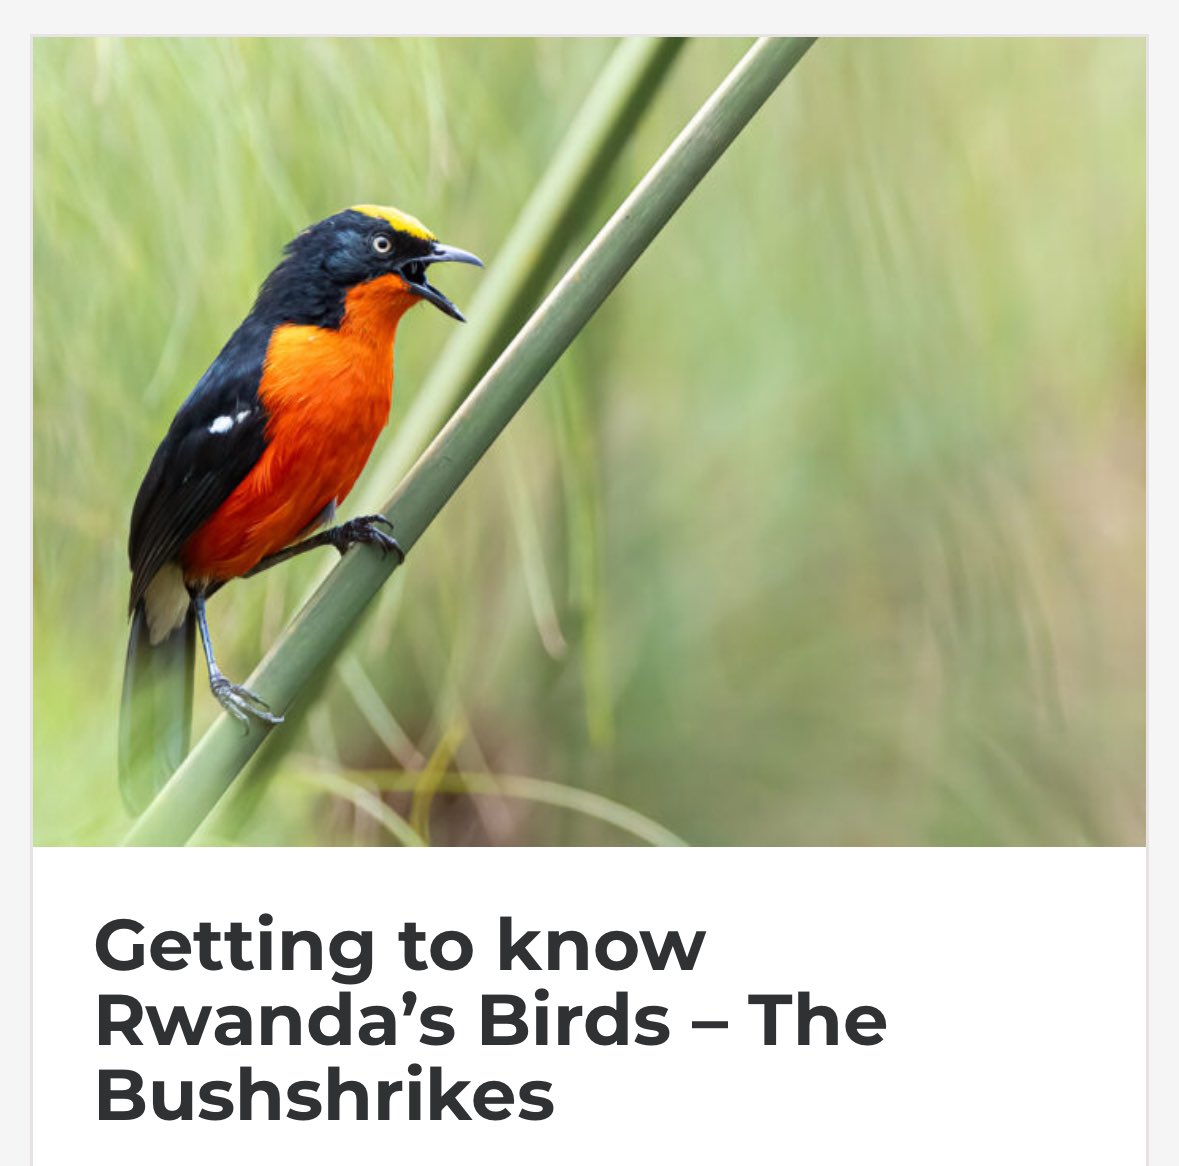 My latest piece about the Birds of #Rwanda is now available, this one focuses on the awesome family of Bushshrikes. Read more here - 2wsphotography.com/getting-to-kno…